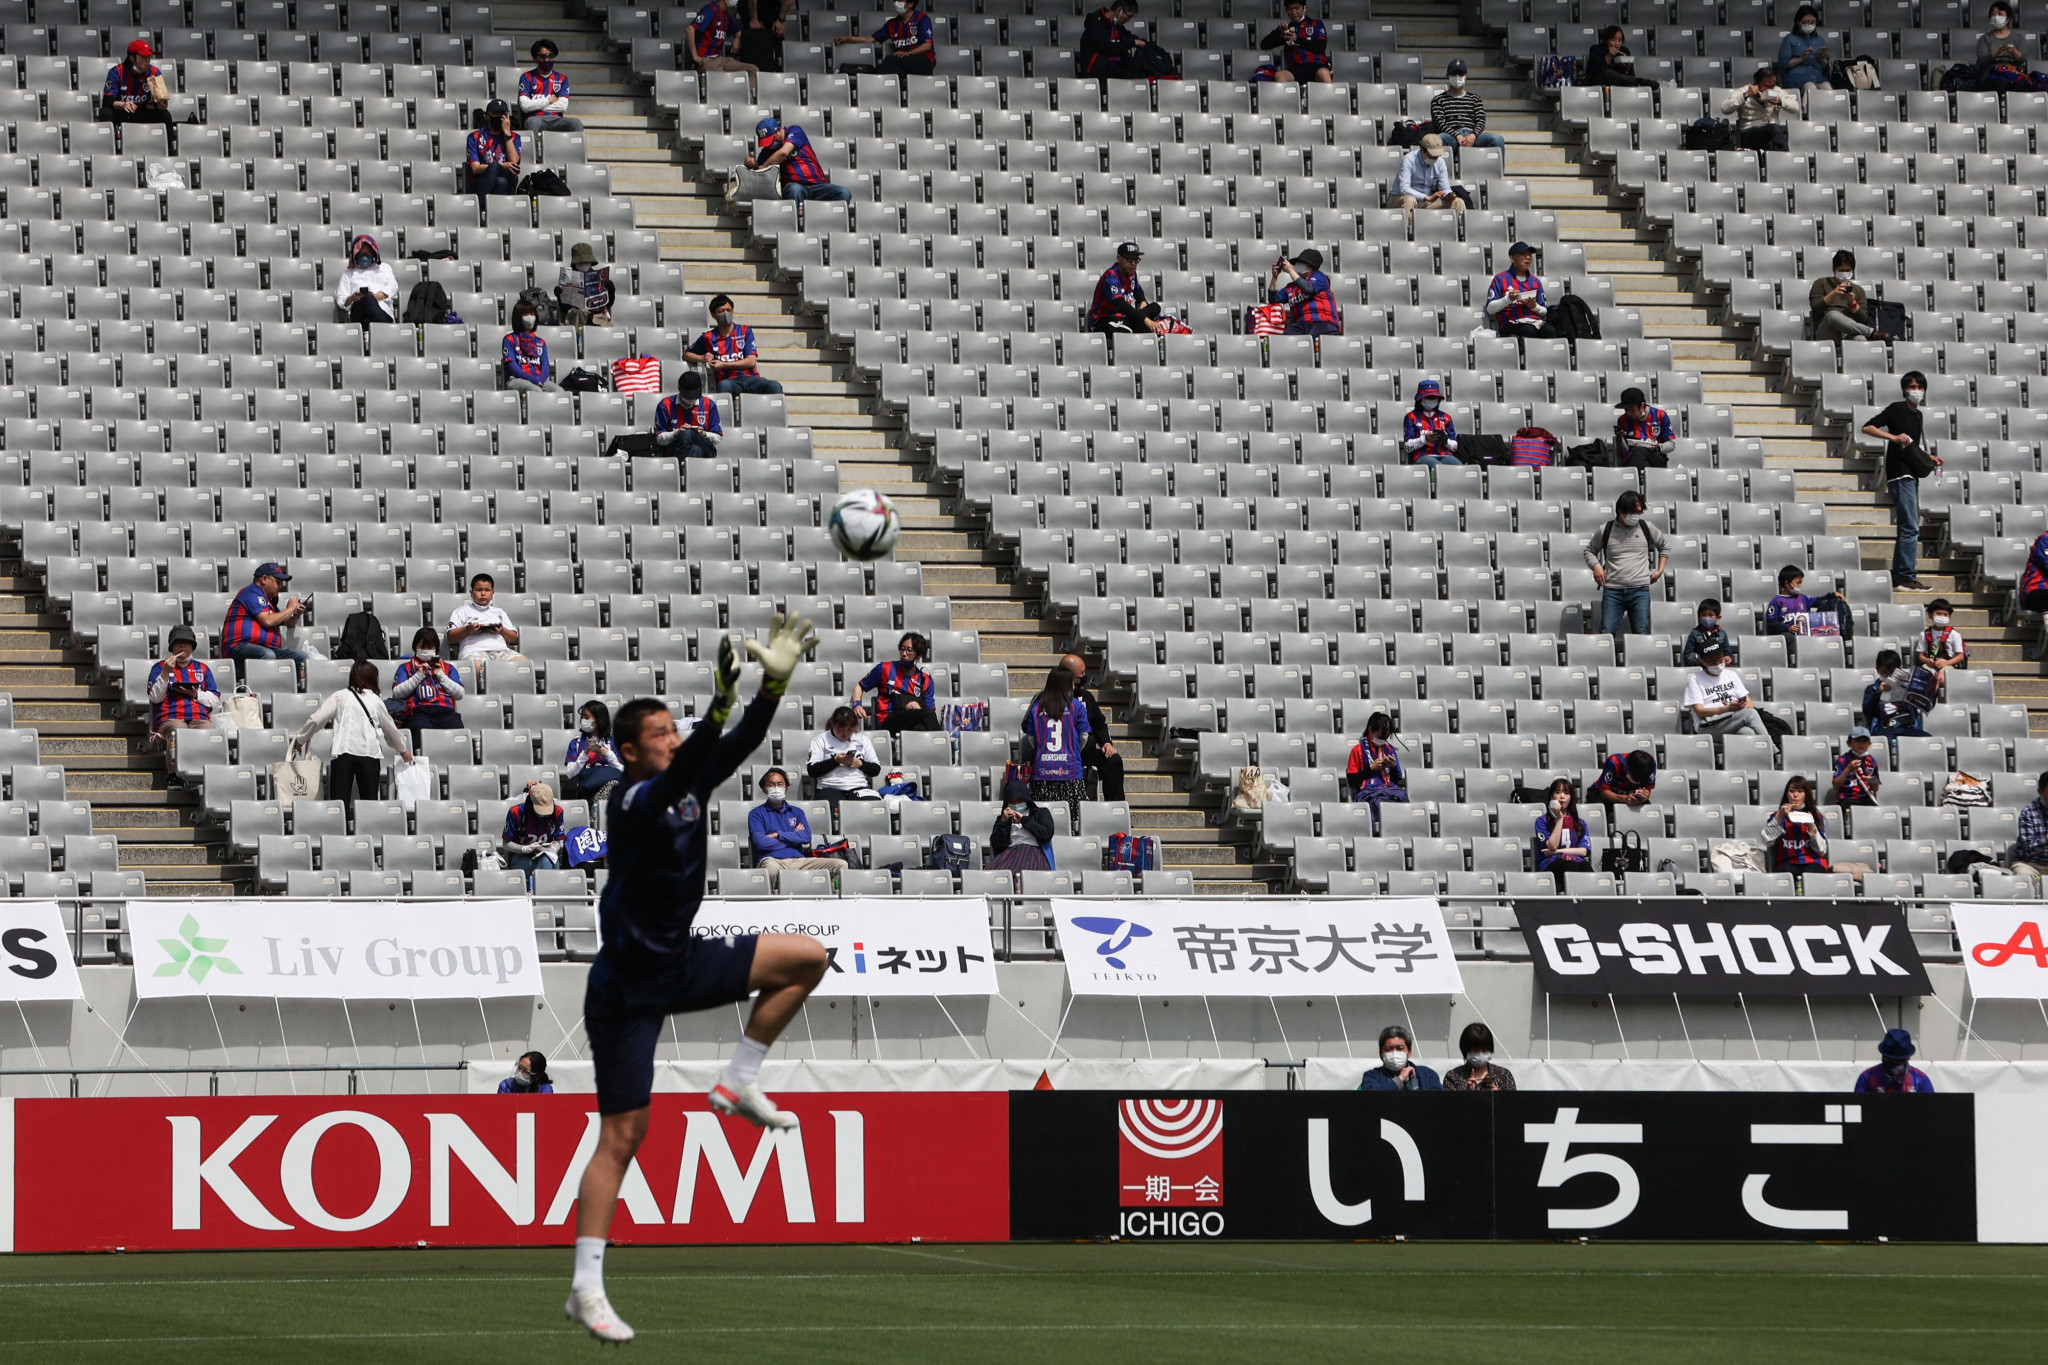 Soccer's J-League will be hoping to play before bigger crowds now that the Japanese Government has lifted its 10,000-spectator limit ©Getty Images